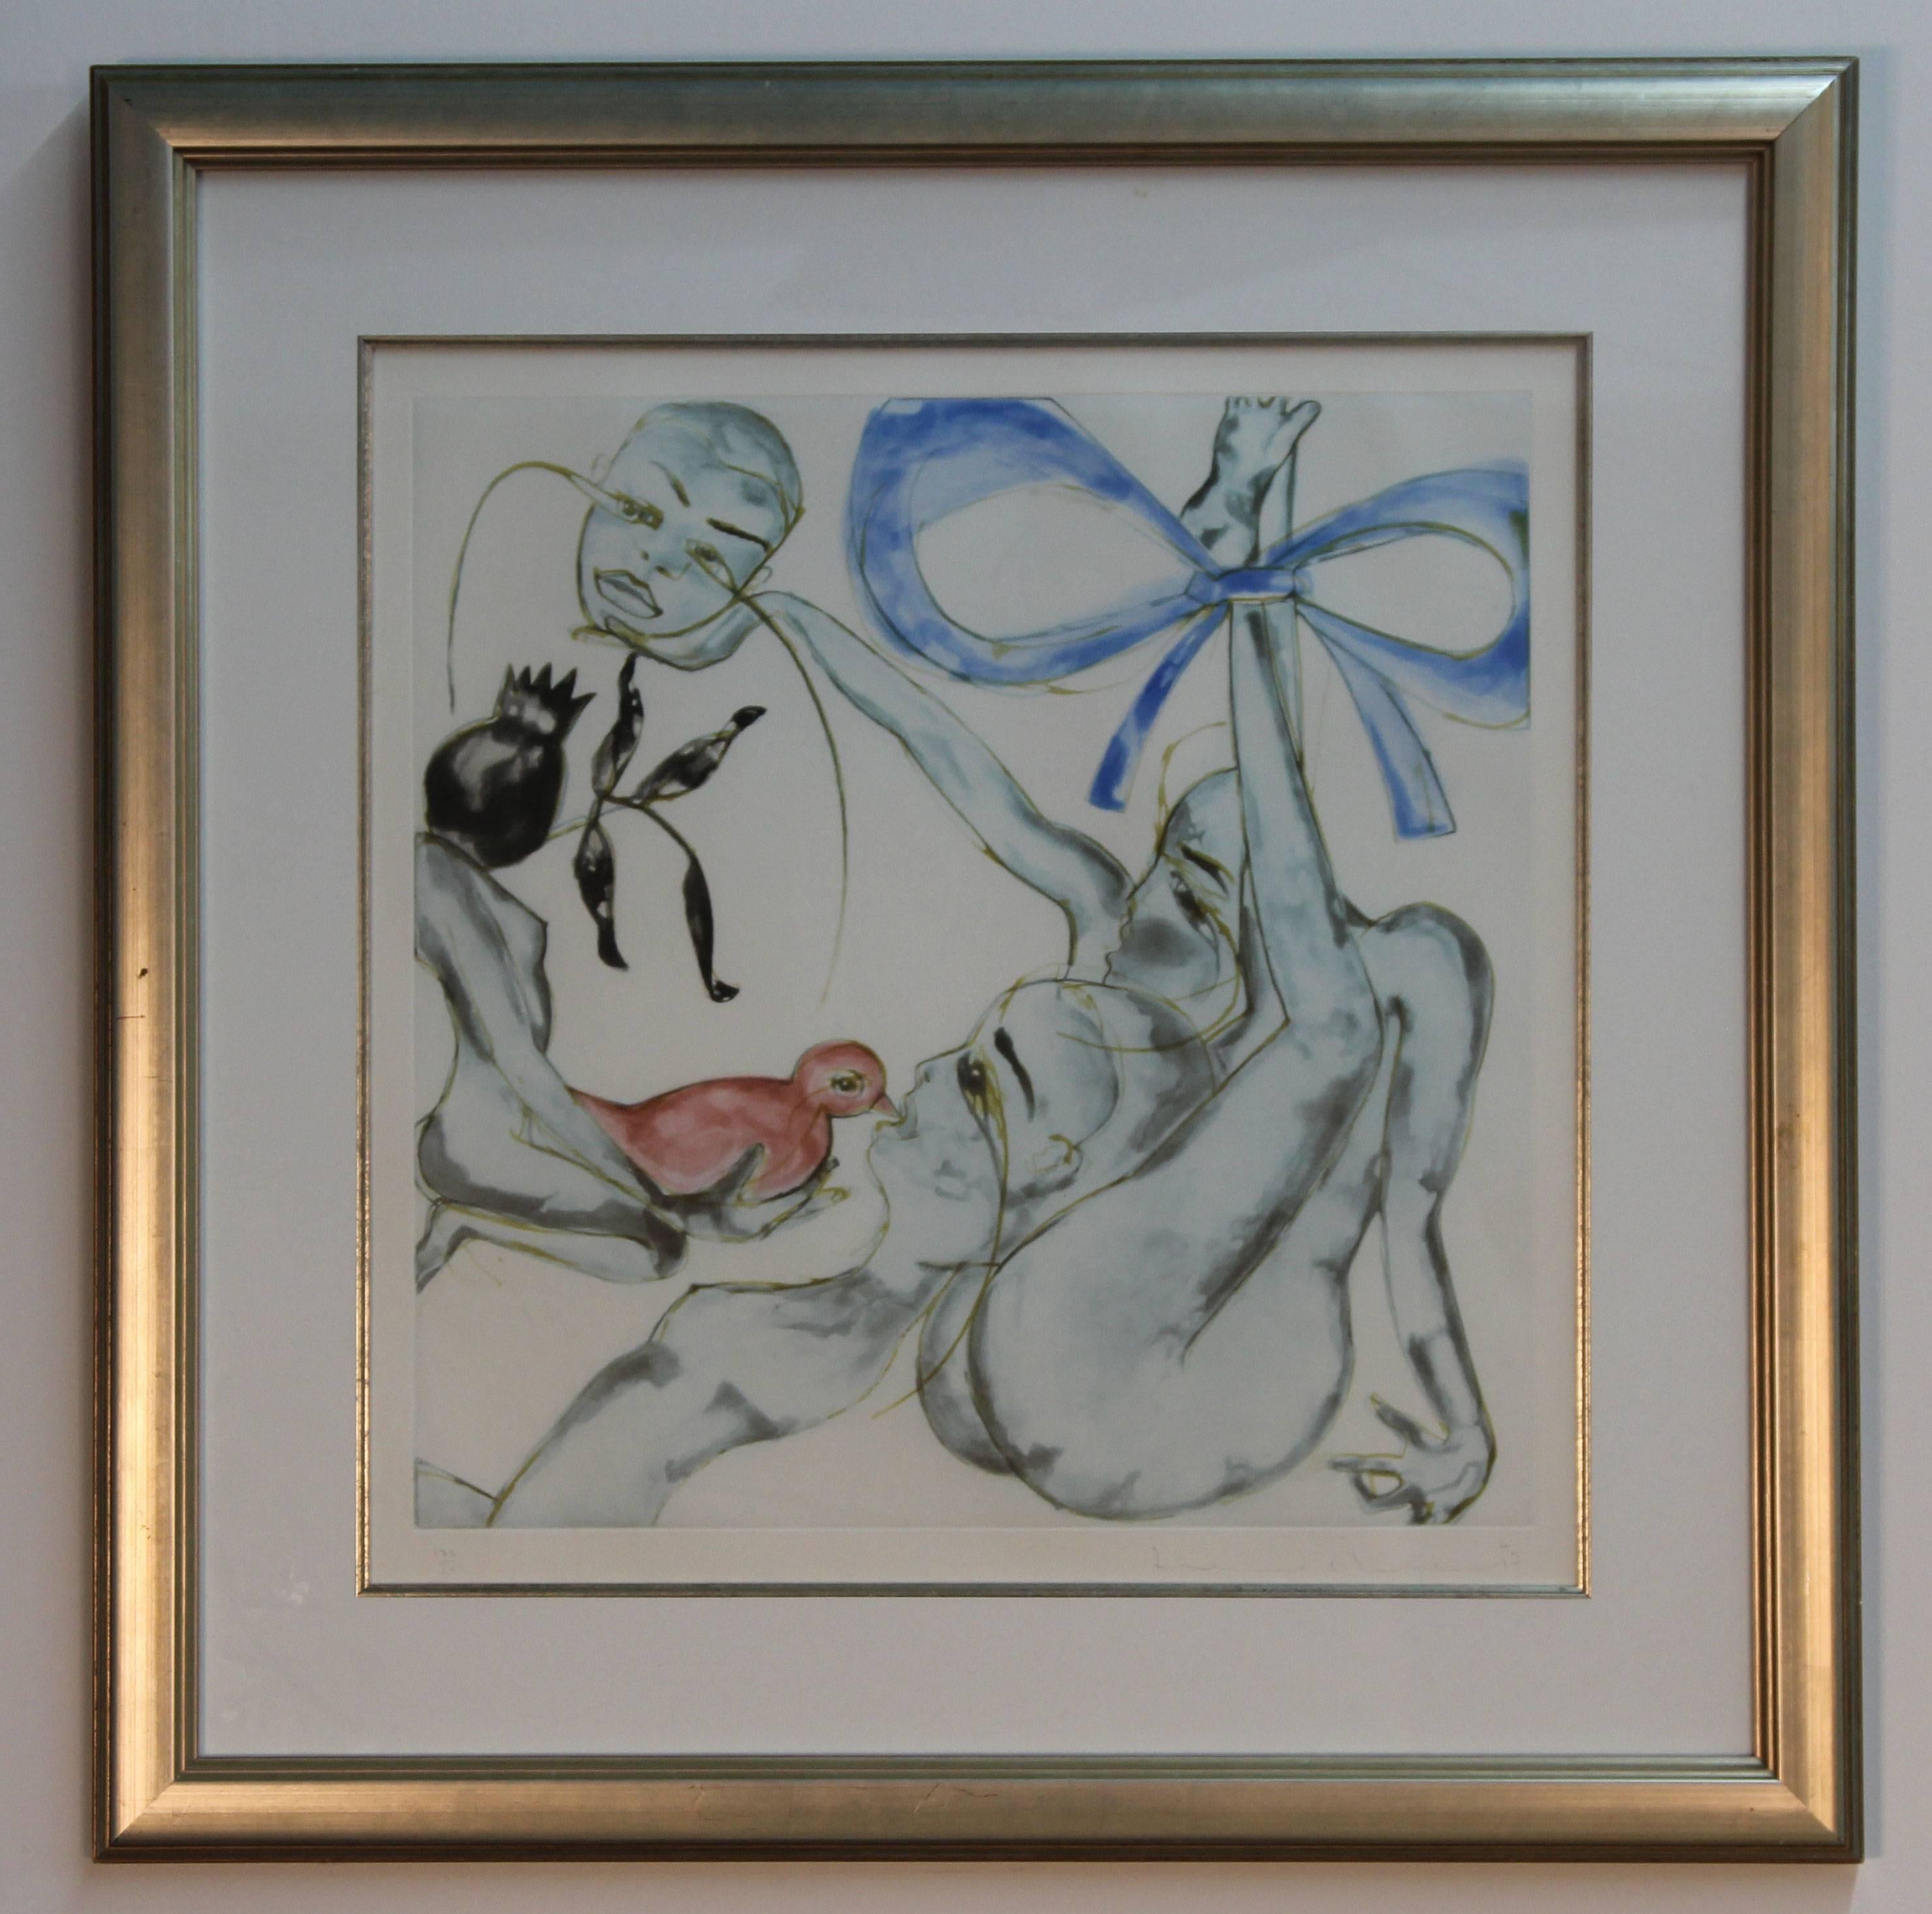 Framed color aquatint on Fabriano paper, signed in pencil and numbered 174/250.  Published by The Solomon R. Guggenheim Museum NY.